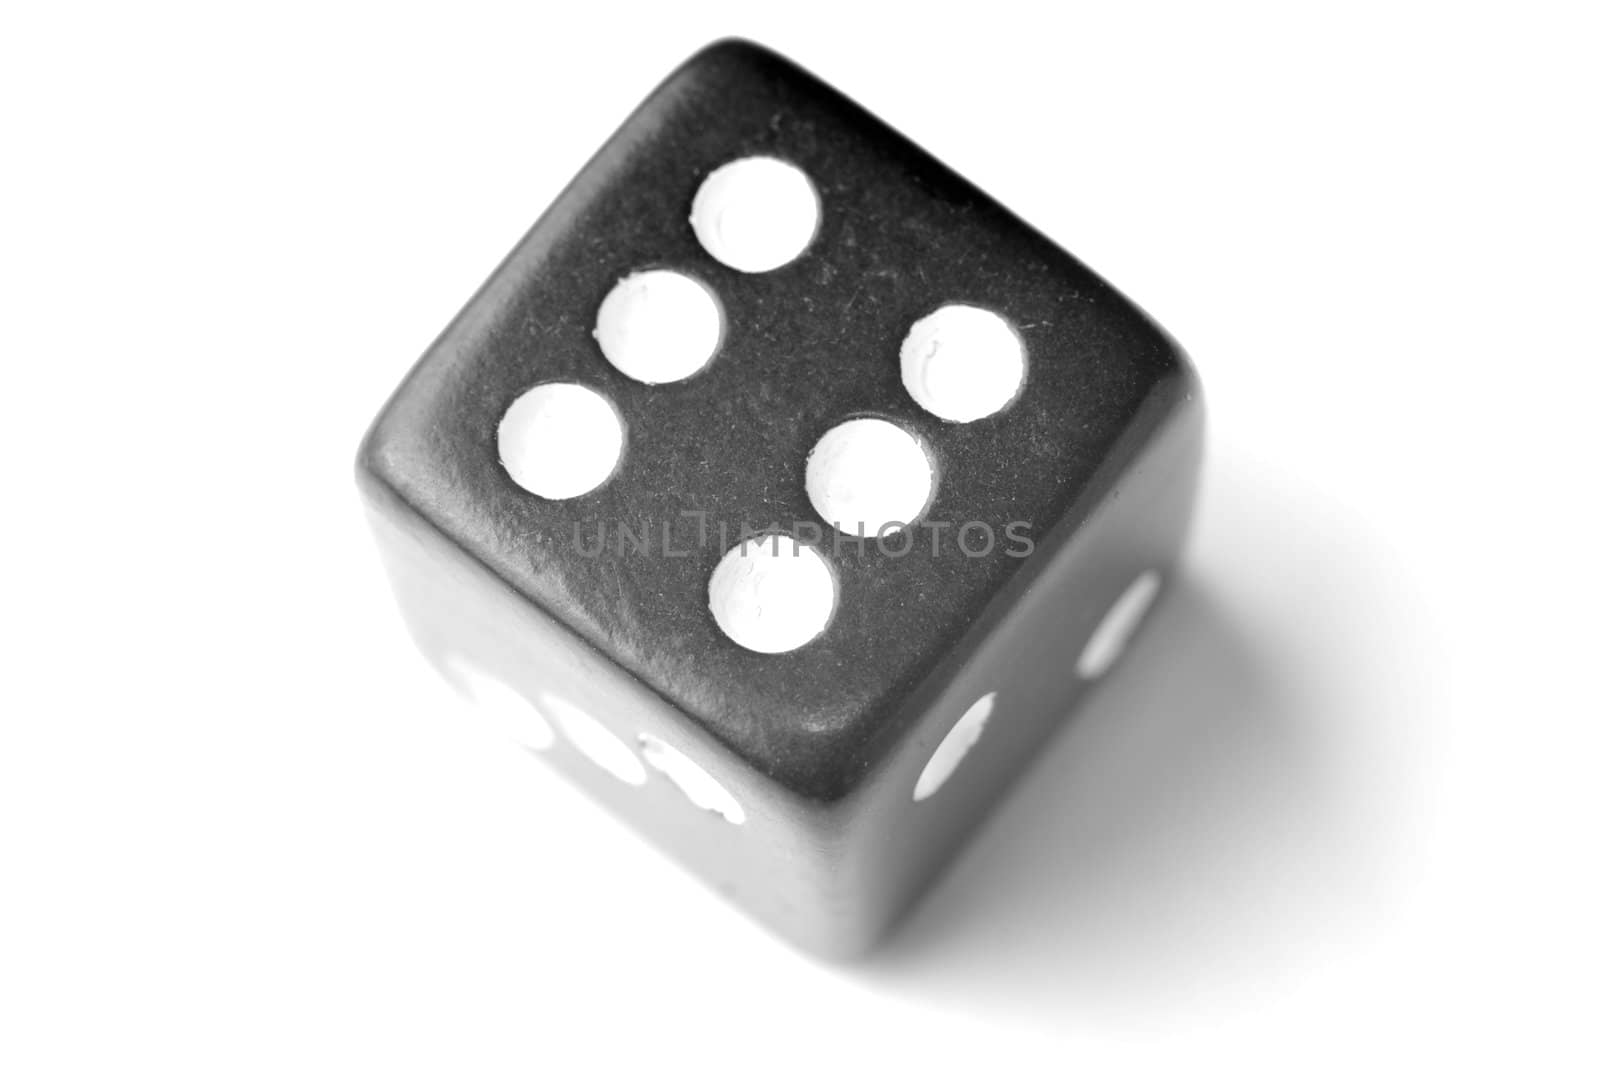 Black Die on White - Six at top. Similar images of 1-6 exists